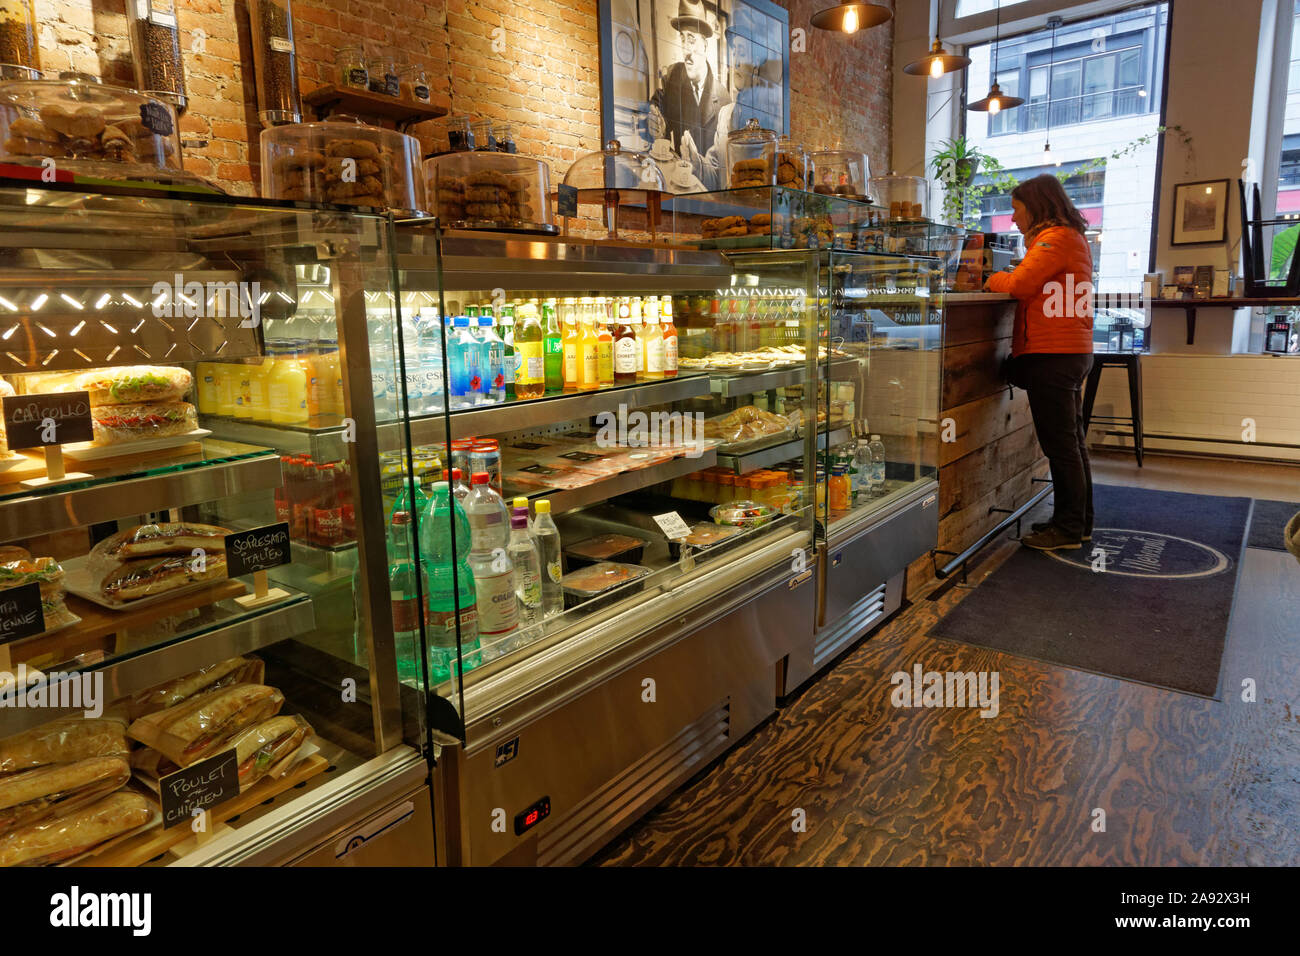 Interior of the Italian style Cafe de Mercanti coffee shop in Old Montreal, Quebec, Canada Stock Photo